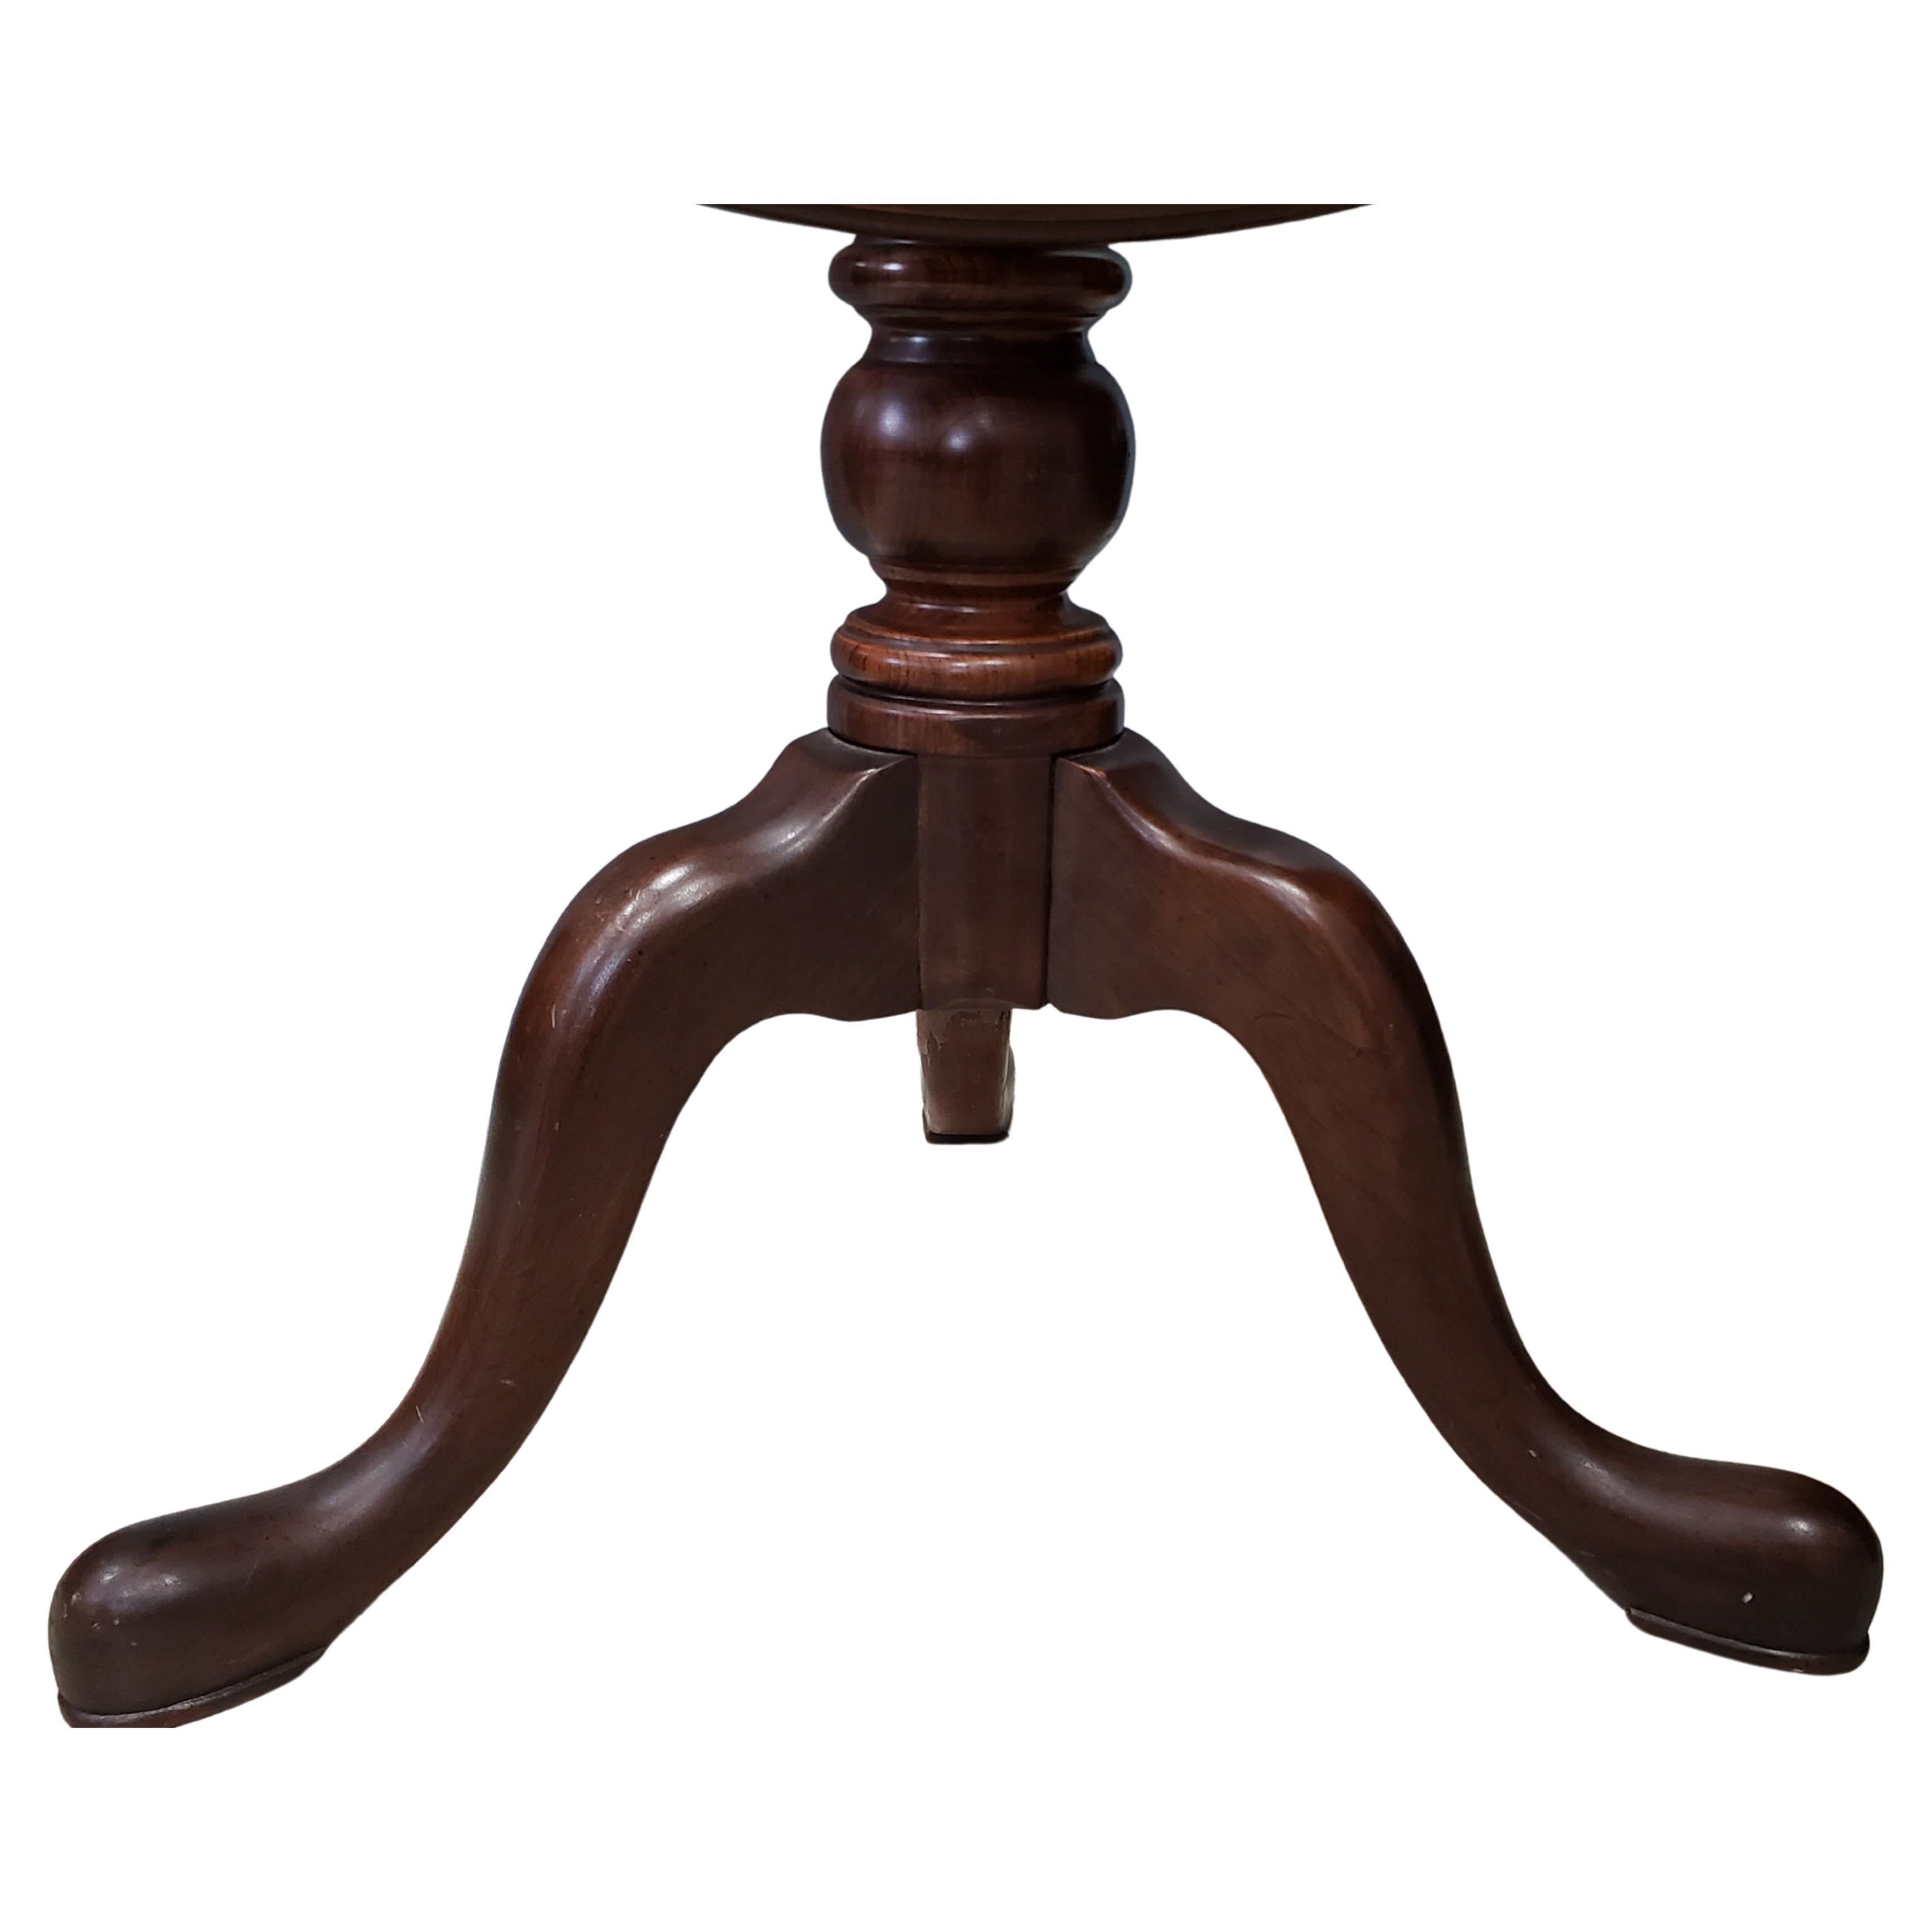 Ethan Allen's Georgian Court collection black cherry tilt top table. Table top spins and is detachable from base for easier handling.
Pad feet tripod pedestal base.
Good original finished condition.
A Good original finished condition.